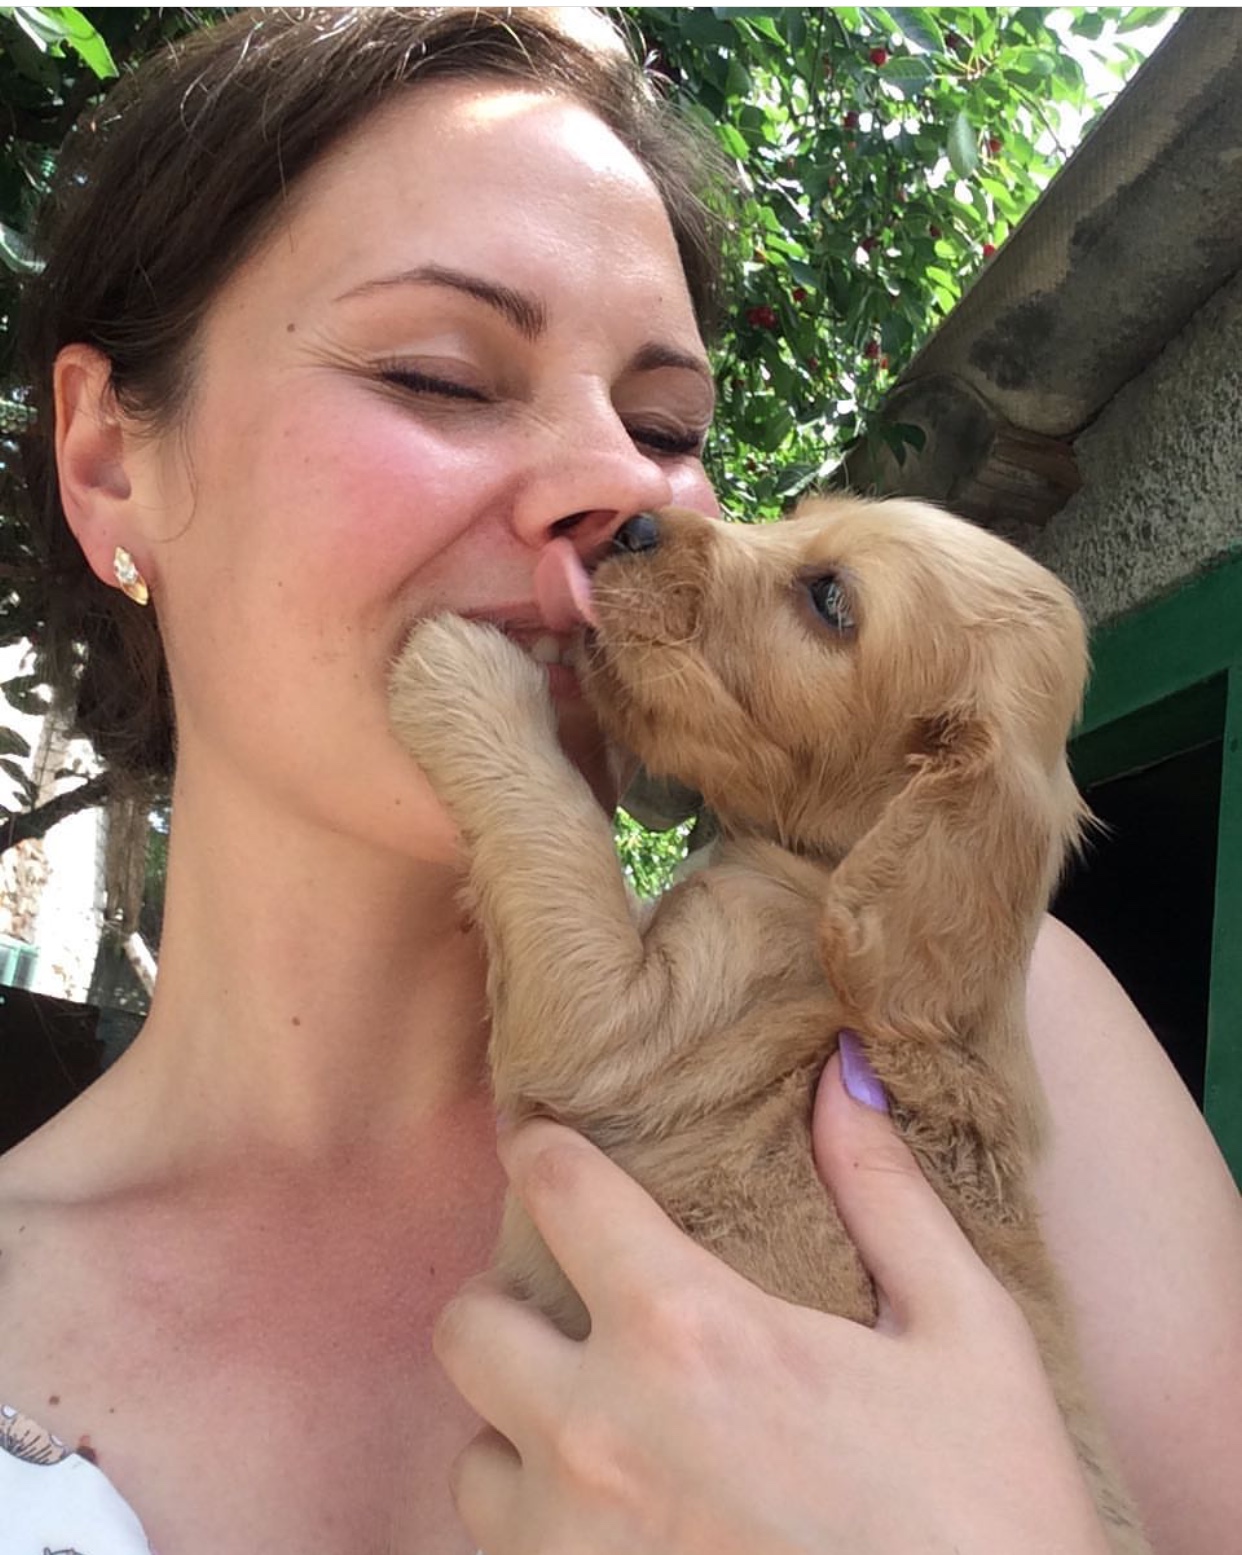 A woman carrying a Cocker Spaniel puppy who is licking her mouth